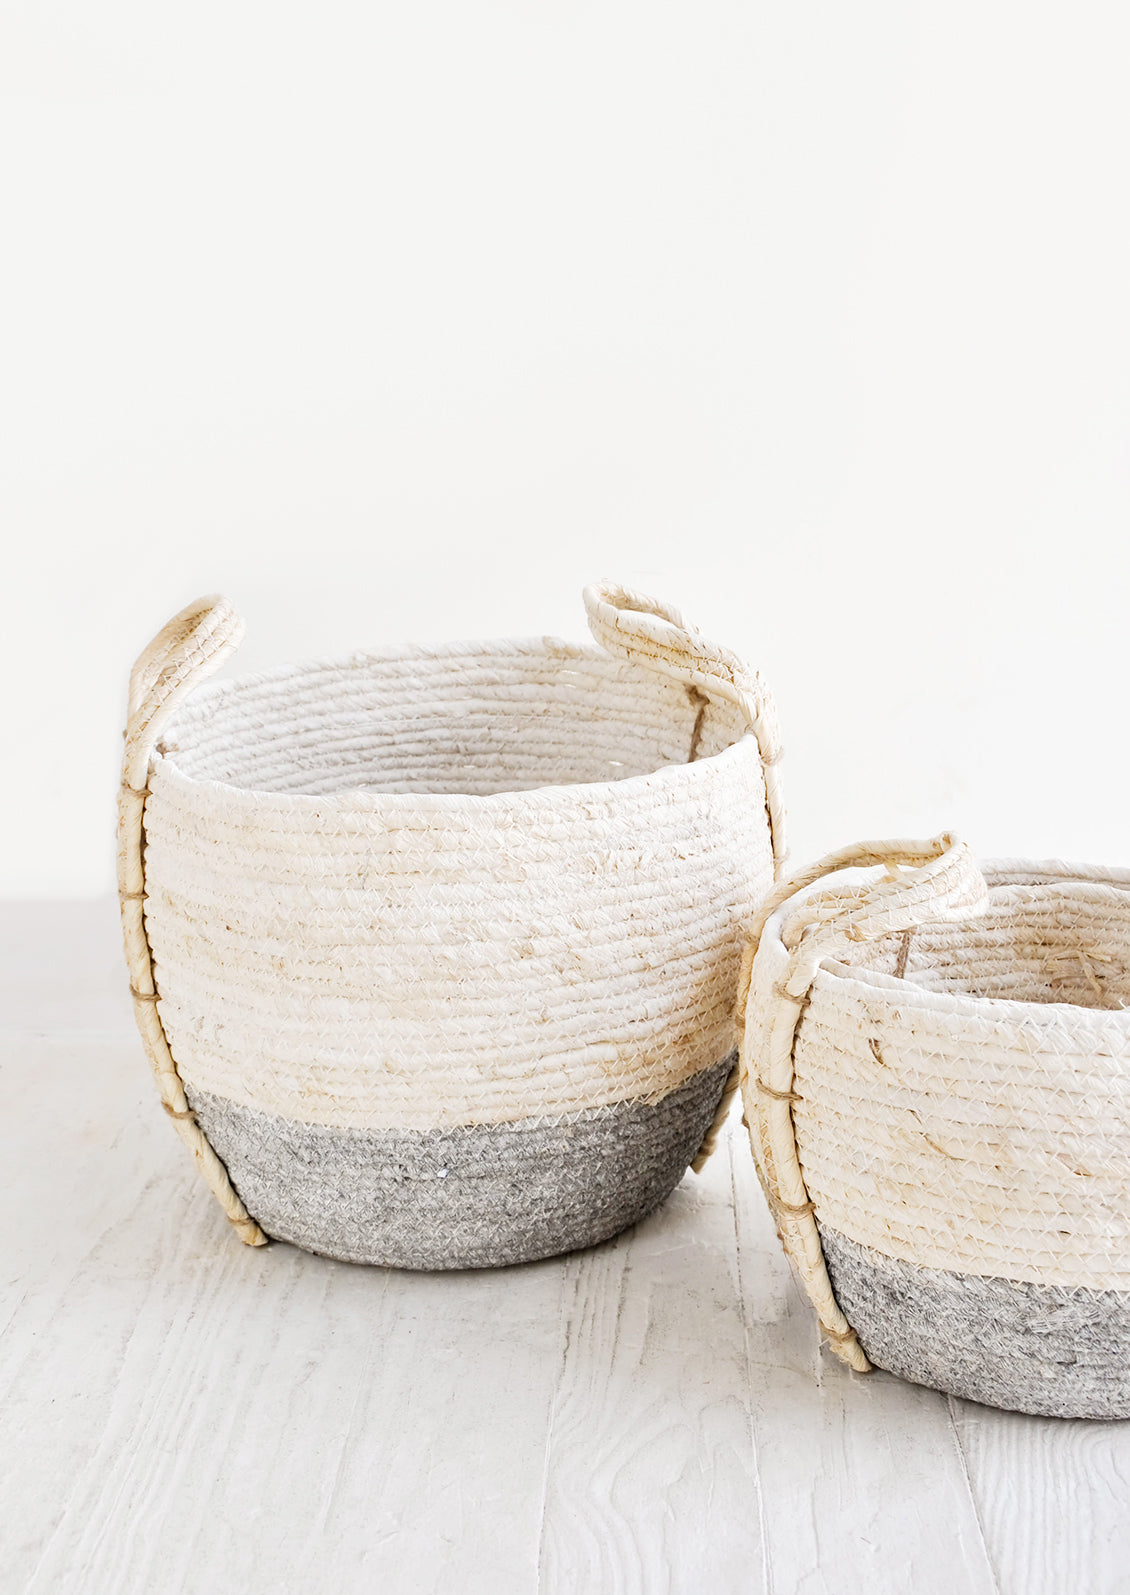 Small, round storage baskets made from natural maize fiber, fiber handles attached at sides, band of contrasting grey color along bottom.